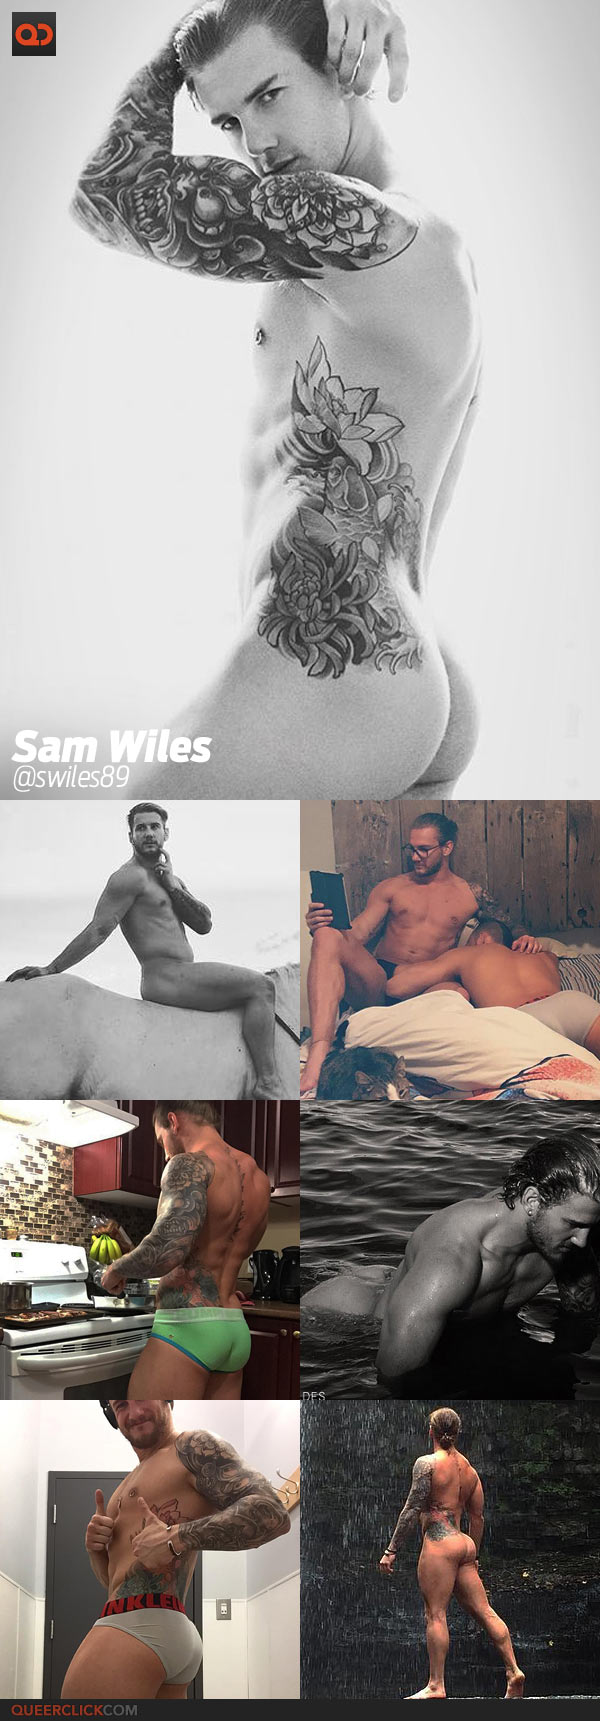 Nine Bootylicious Guys You Need To Follow On Instagram! - Part 4